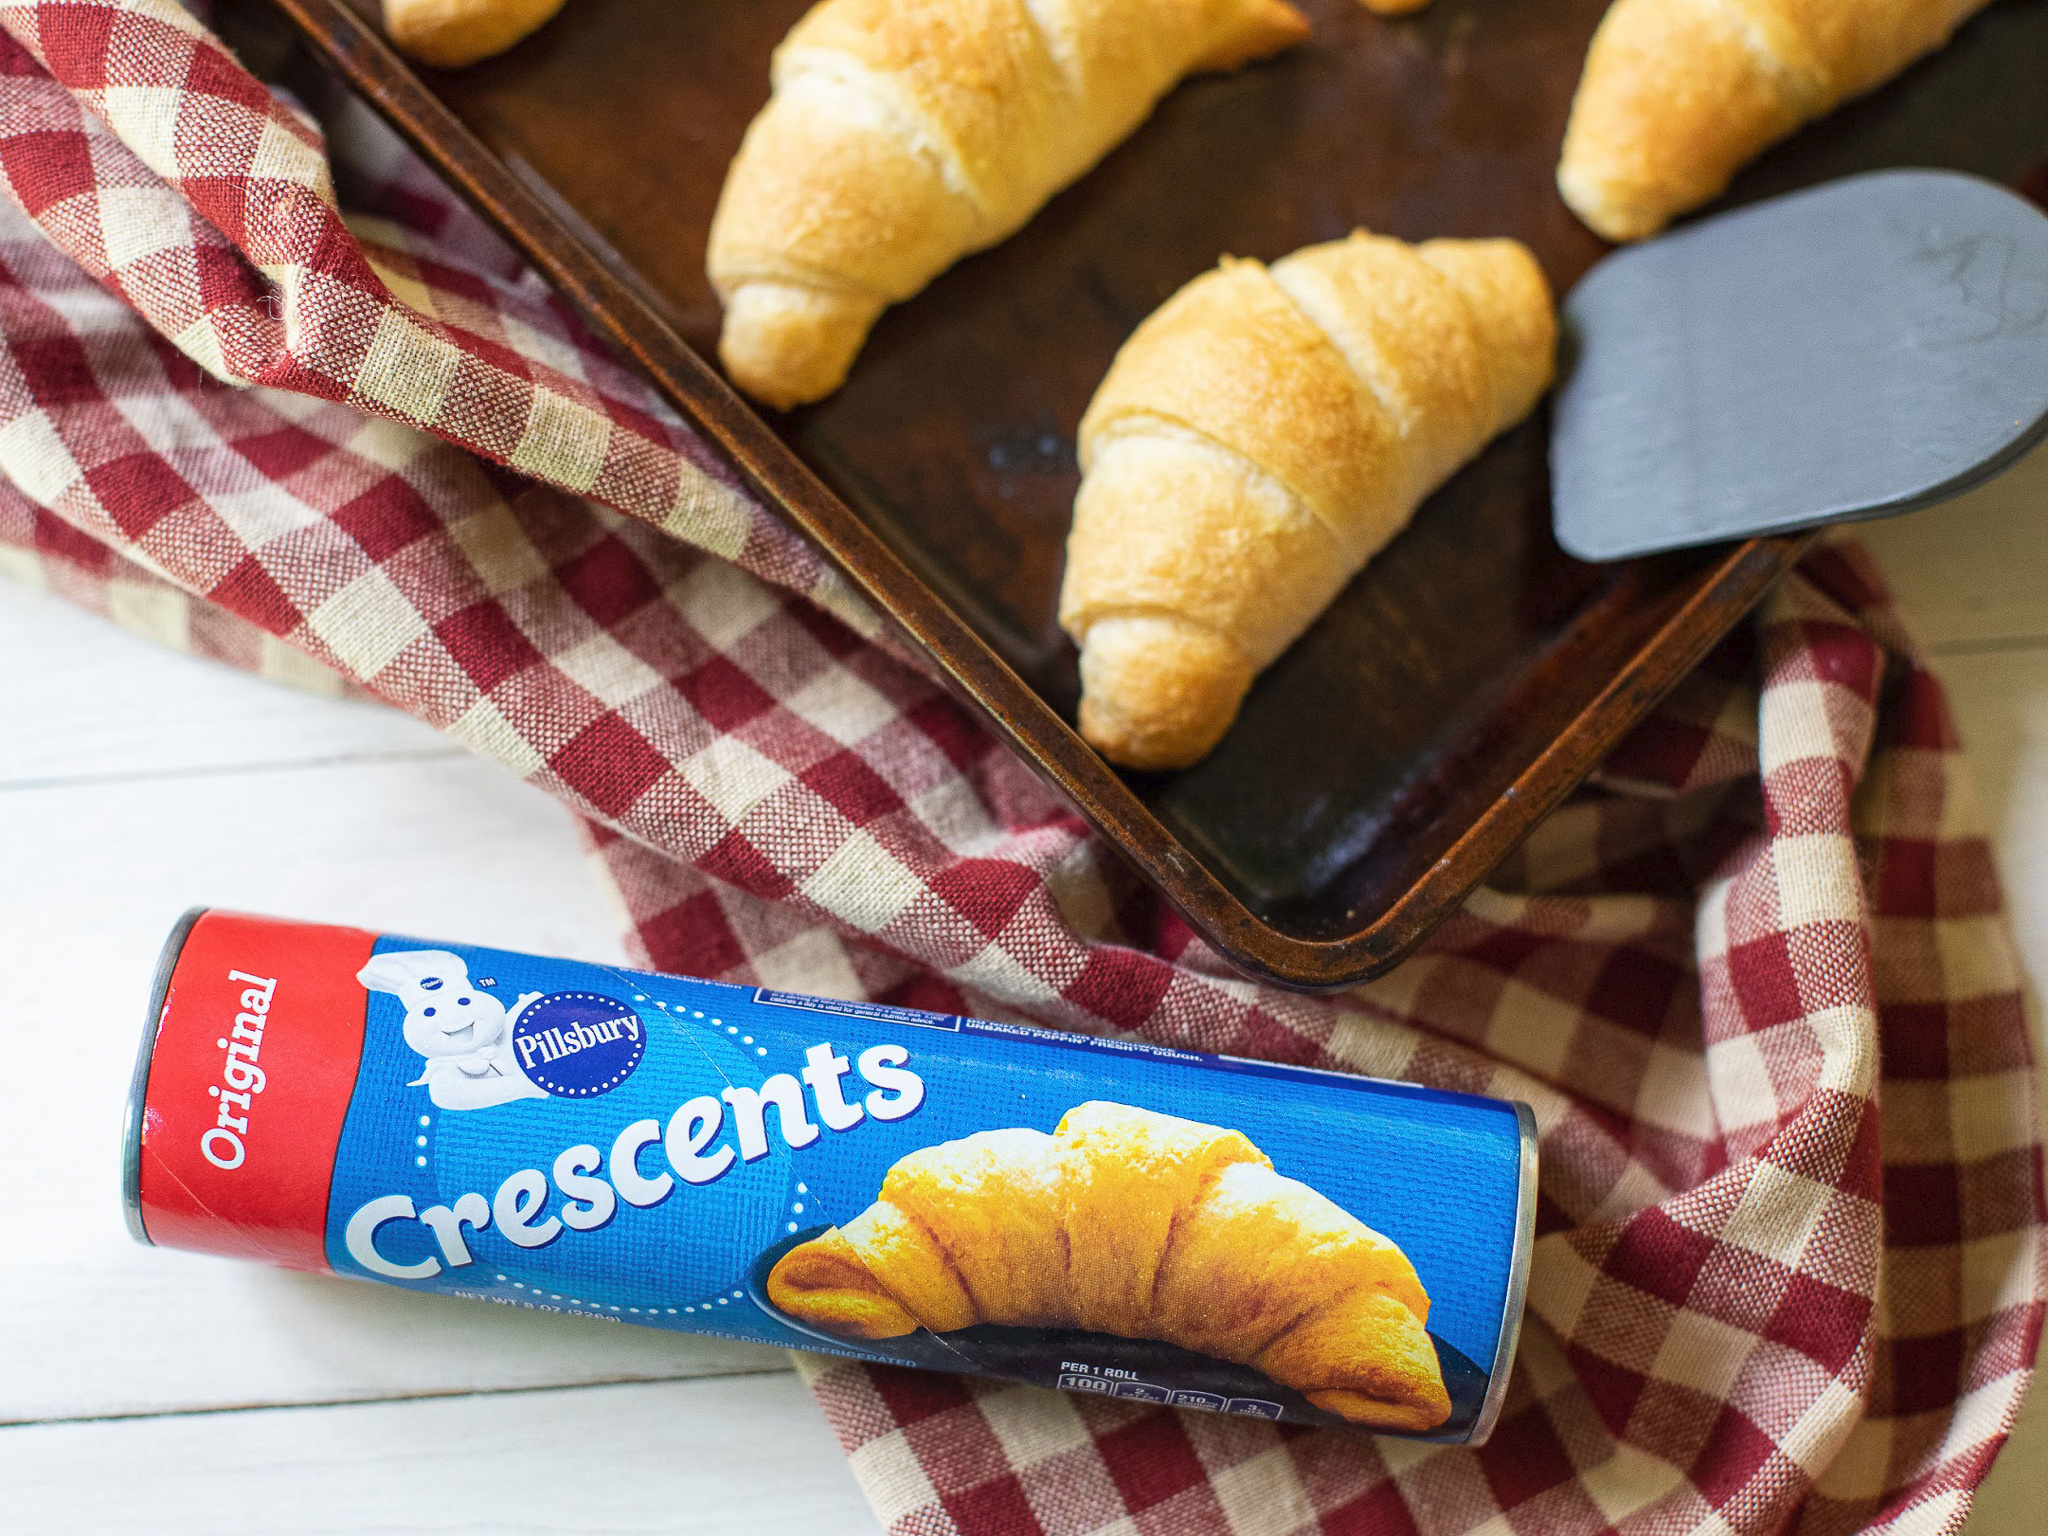 Pick Up Pillsbury Crescents As Low As $1.40 At Publix – Plus Cheap Biscuits